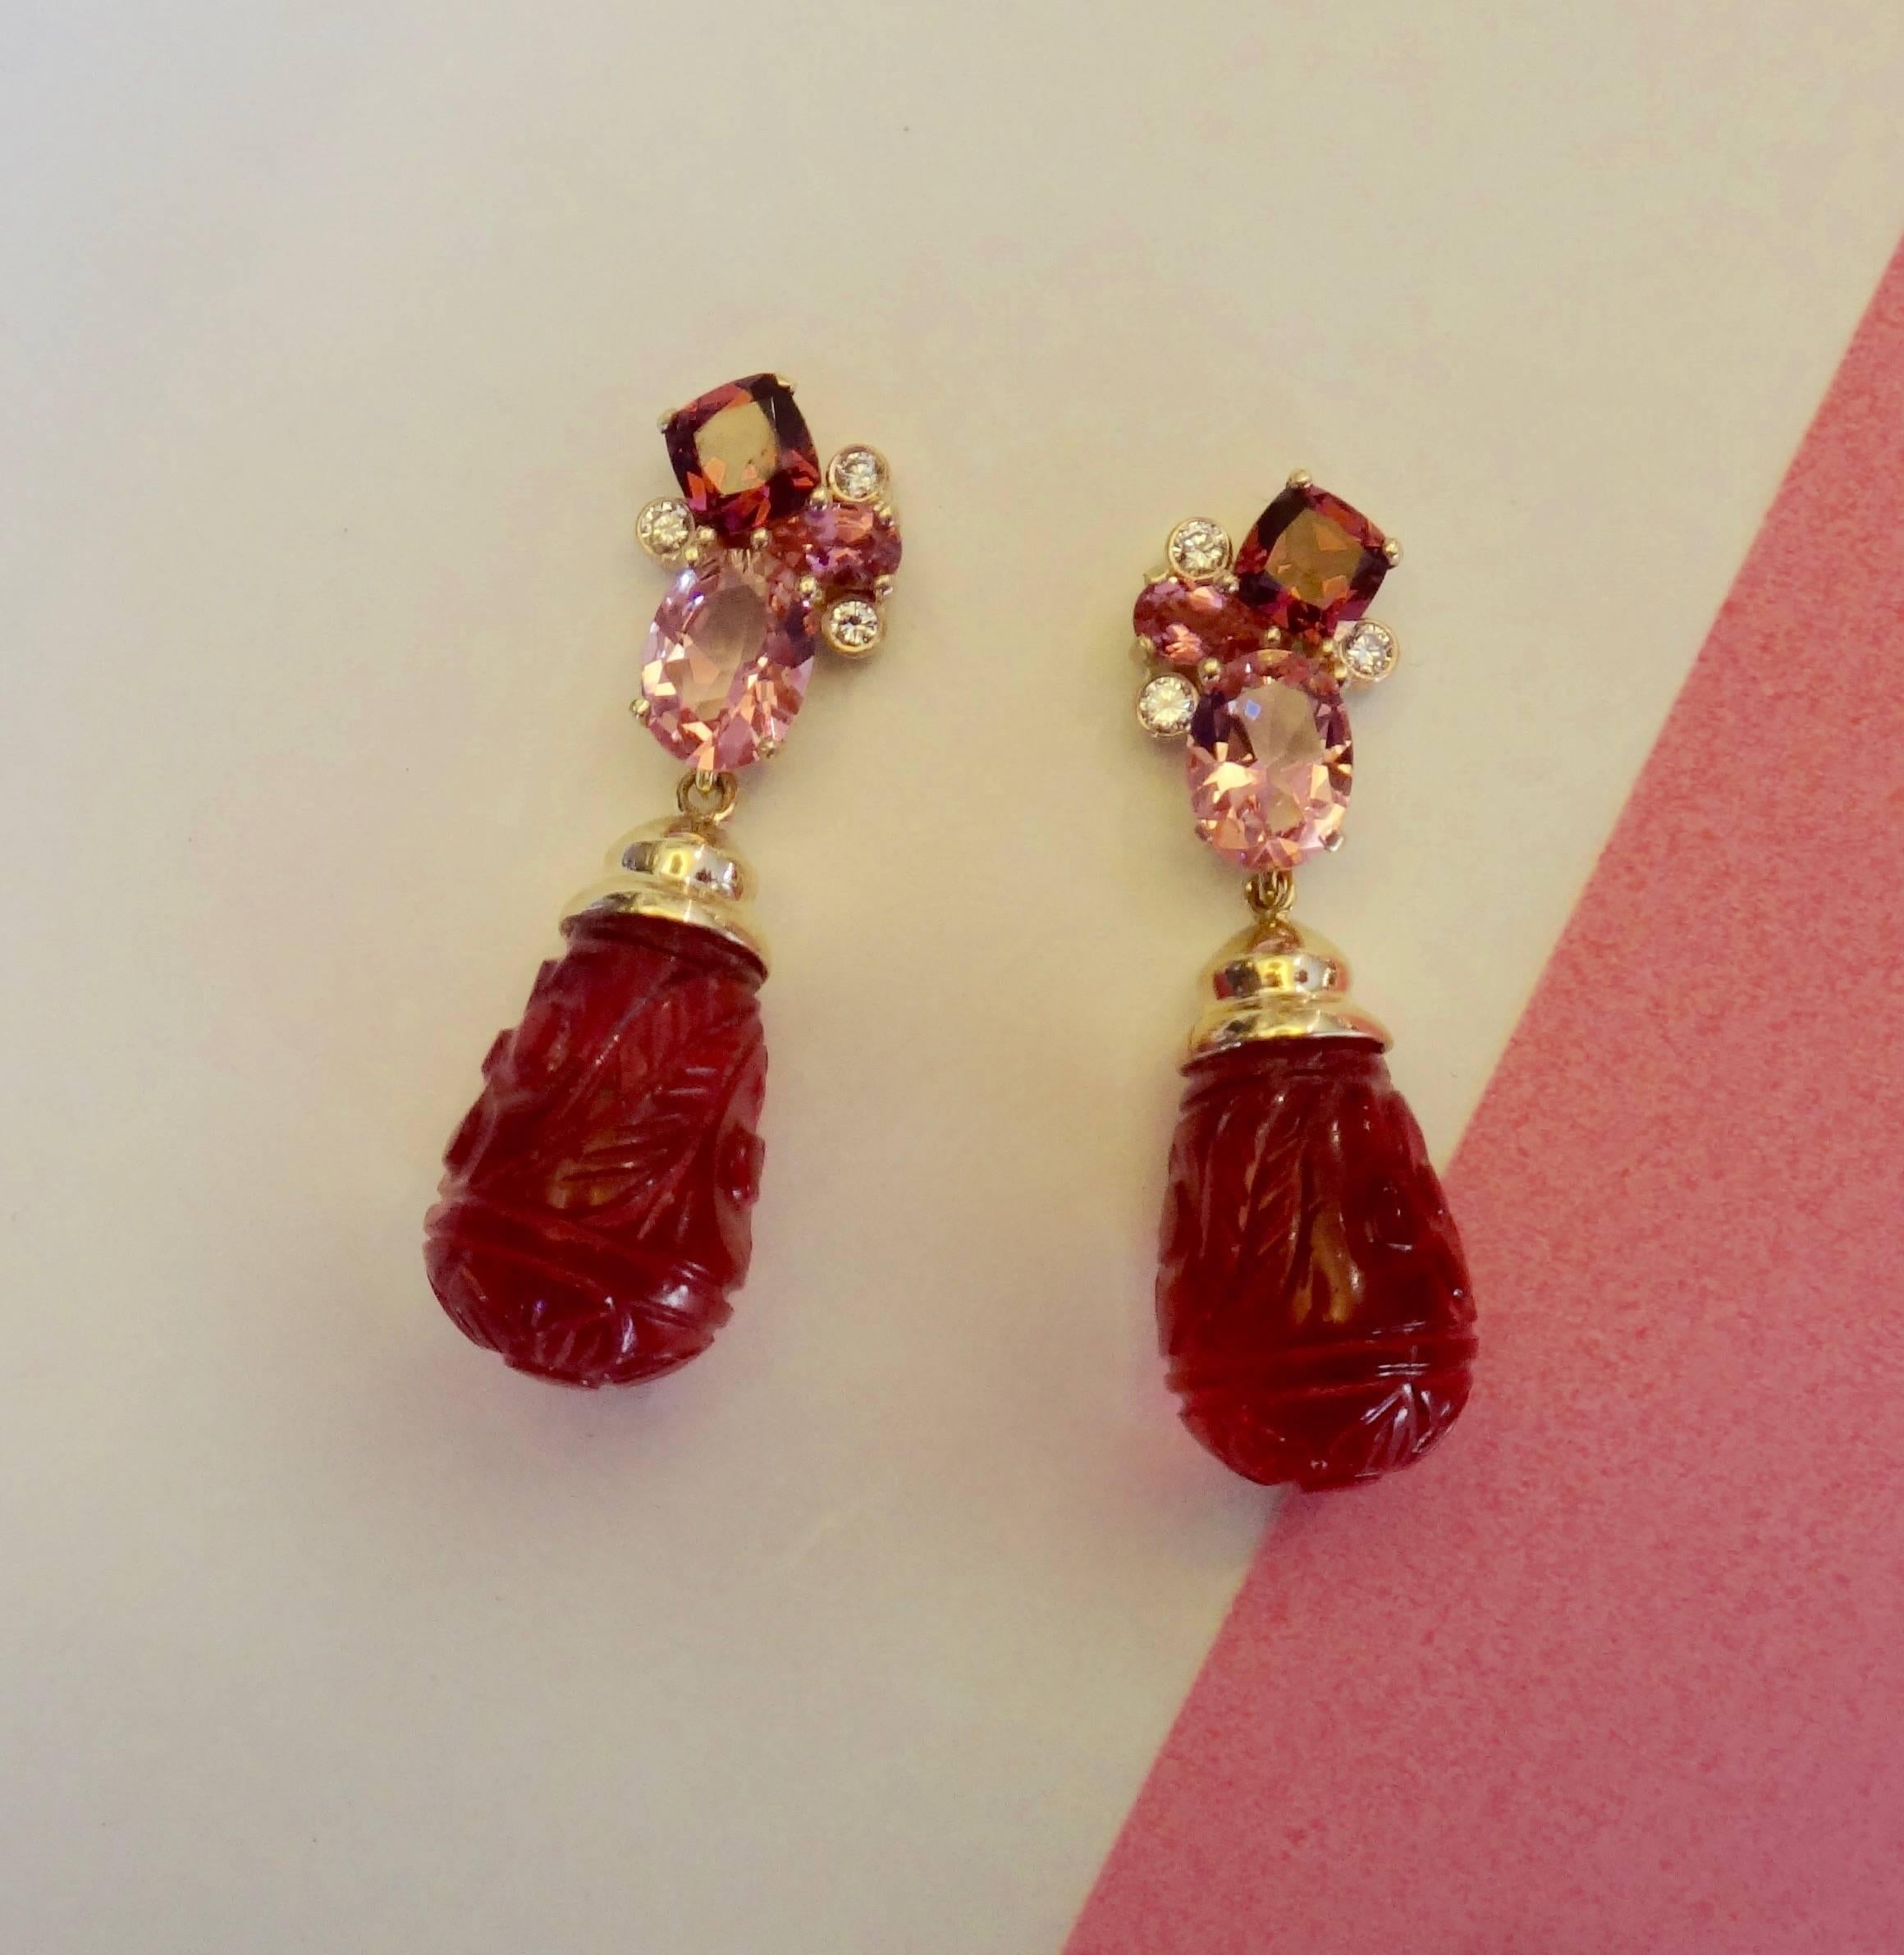 Indian carved pink topaz drops dangle from "Confetti" earrings composed of rhodolite garnets, pink tourmalines, pink topaz and diamonds. The handmade settings come with posts and jumbo friction backs.  